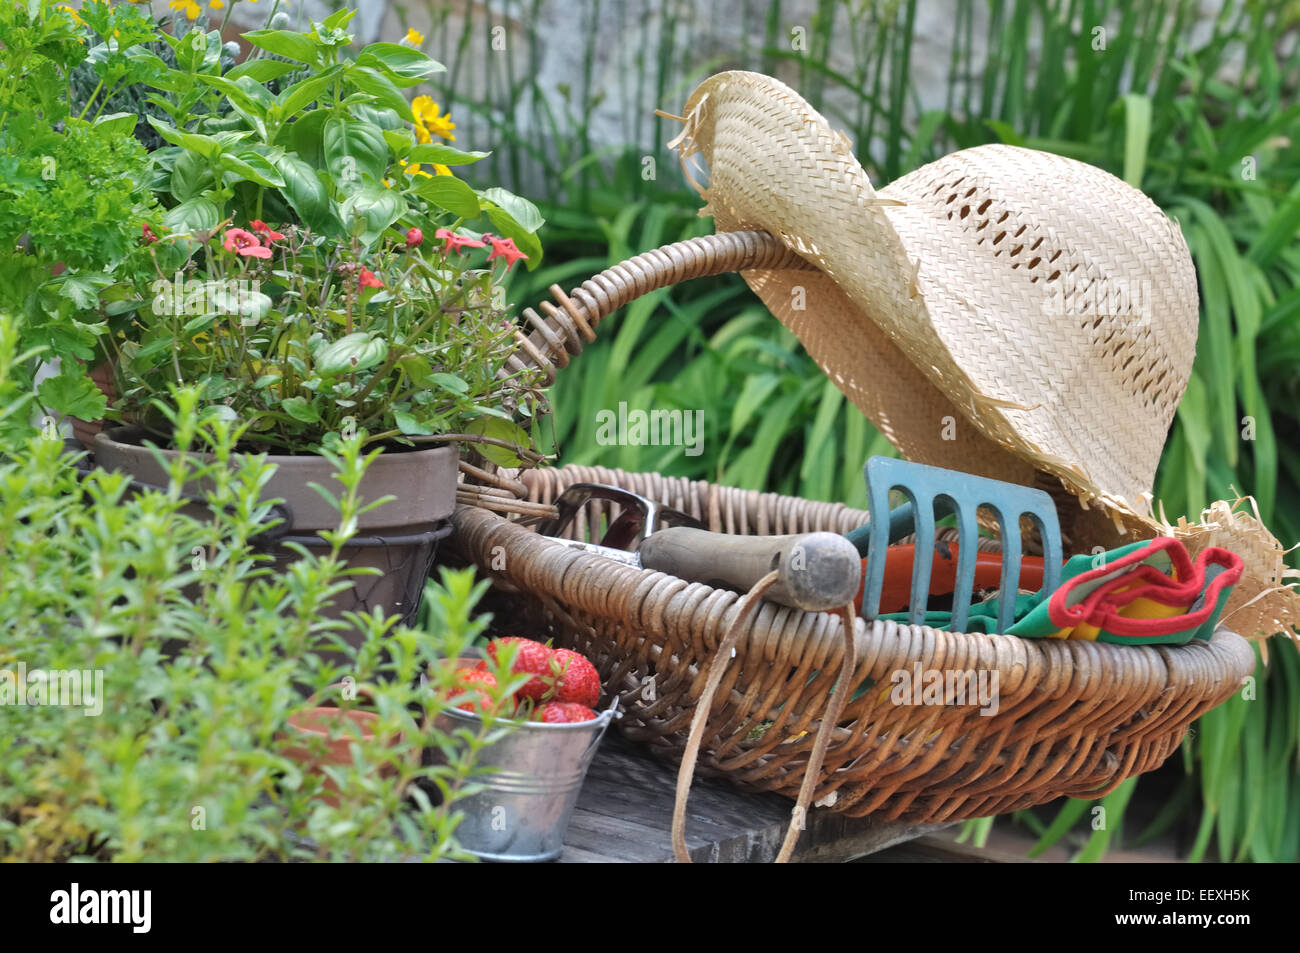 gardening tools in a basket with straw hat among aromatic herbs,flowers and strawberries Stock Photo